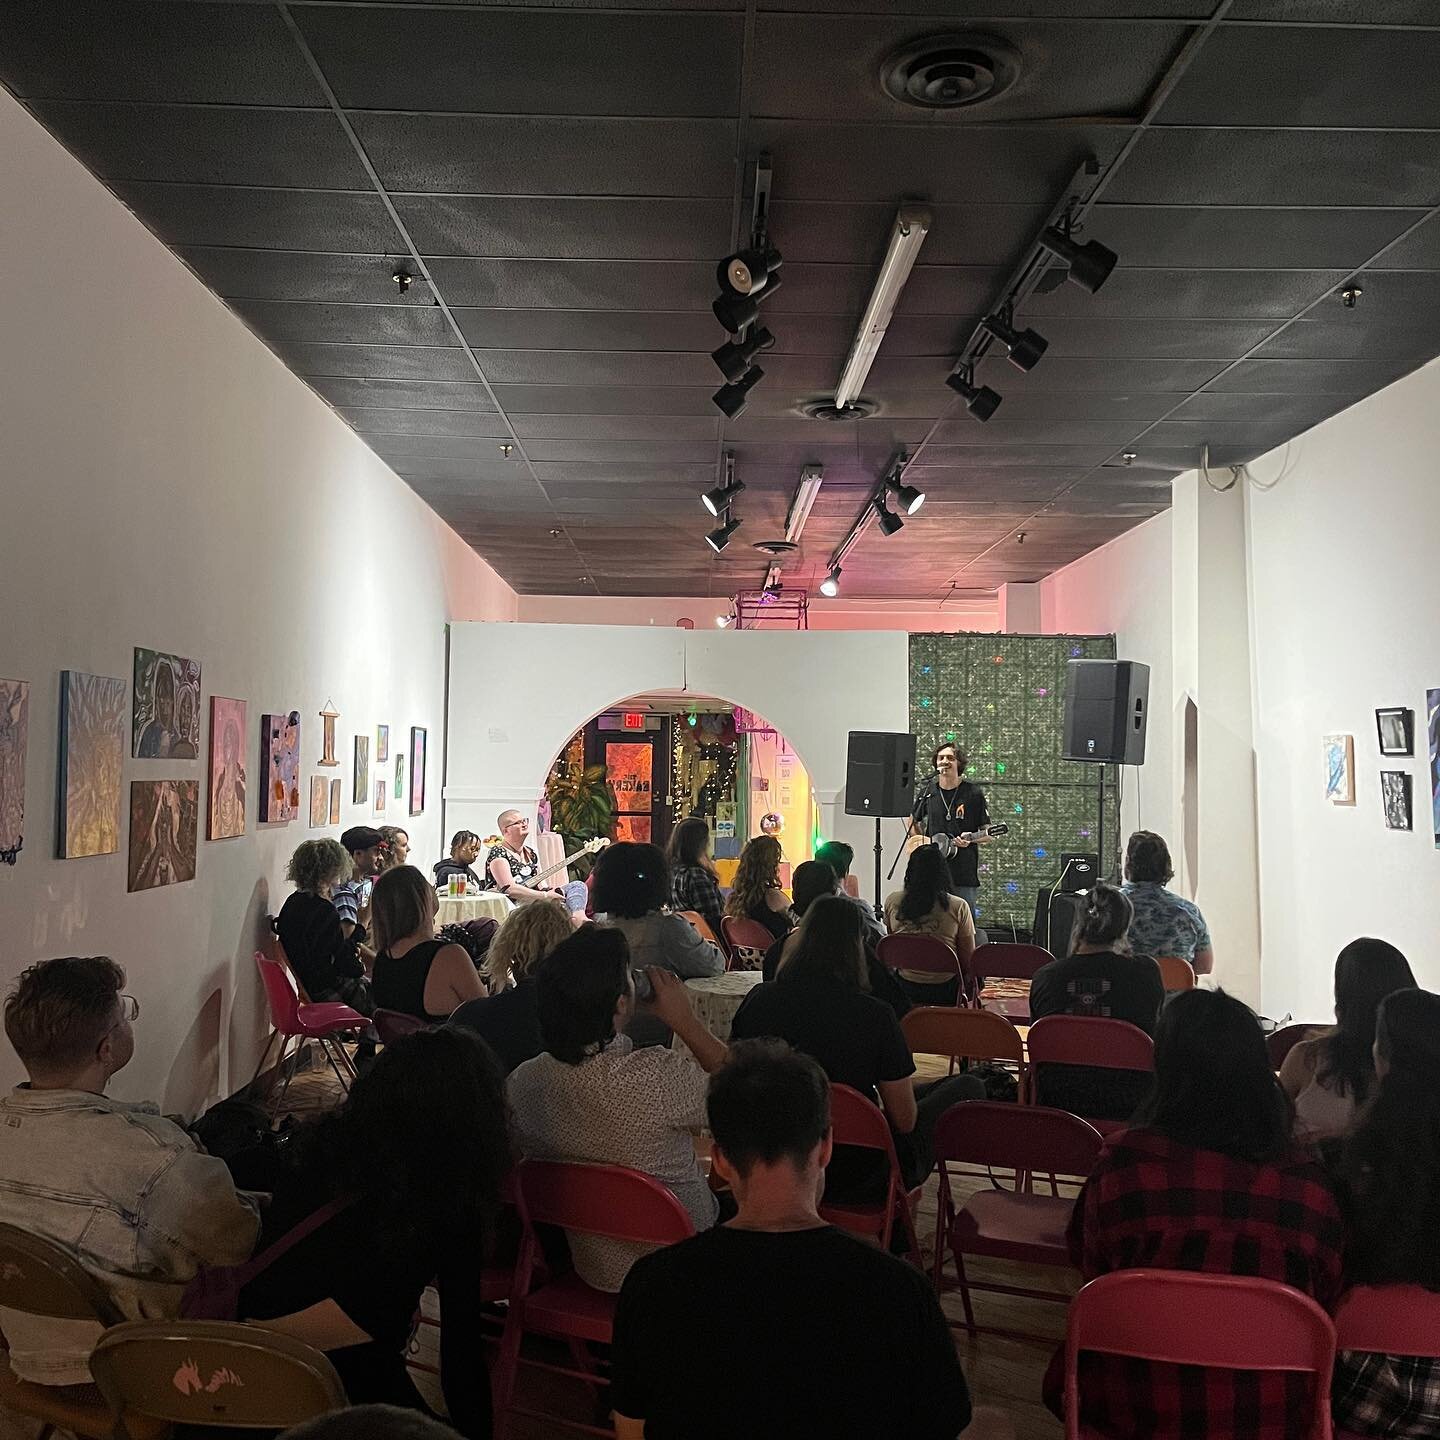 Calling all writers and performers! 💫 Join us next Friday night 10/13 @ 7-9pm for Deconstruct &amp; Reassemble, an open mic hosted by @bodyshopforthebody. This is the perfect space to share your poems, stories, songs, jokes, raps, scripts, and more 